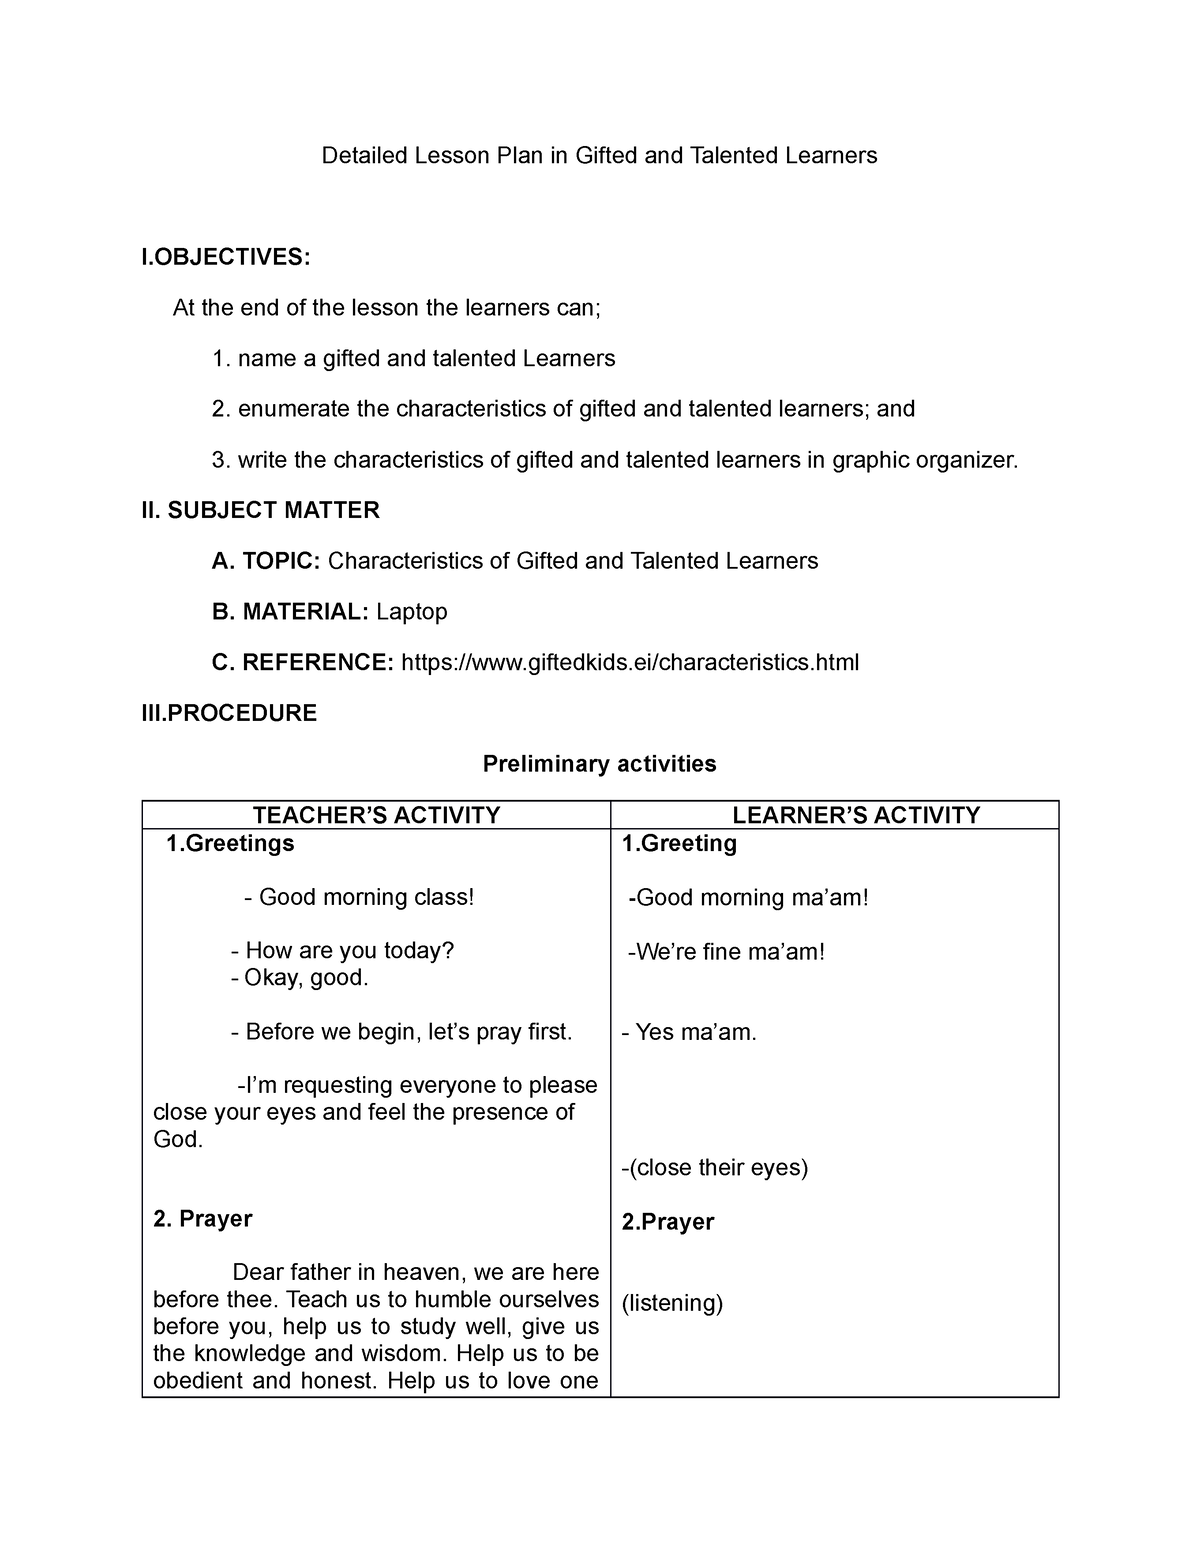 Lesson PLAN IN Gifted AND Talented Learners Detailed Lesson Plan in